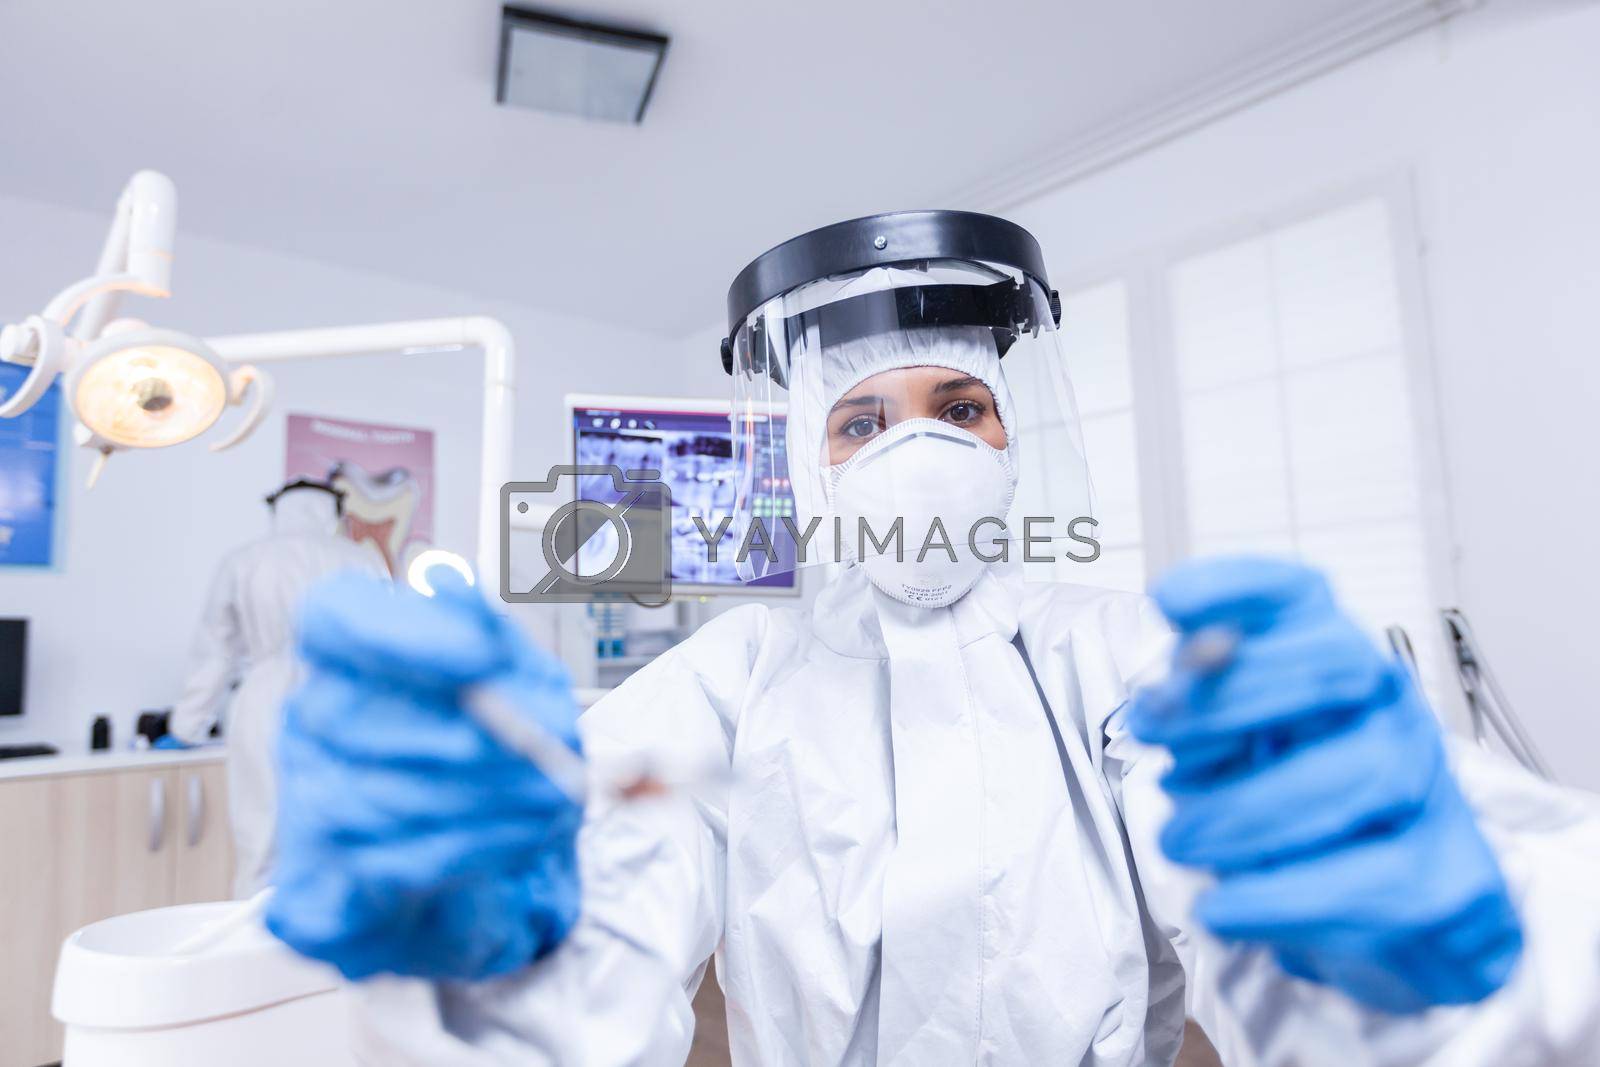 Patient pov of dentist examining patient gums using tools dressed up in covid suit in dental office. Stomatolog wearing safety gear against coronavirus during heatlhcare check of patient.